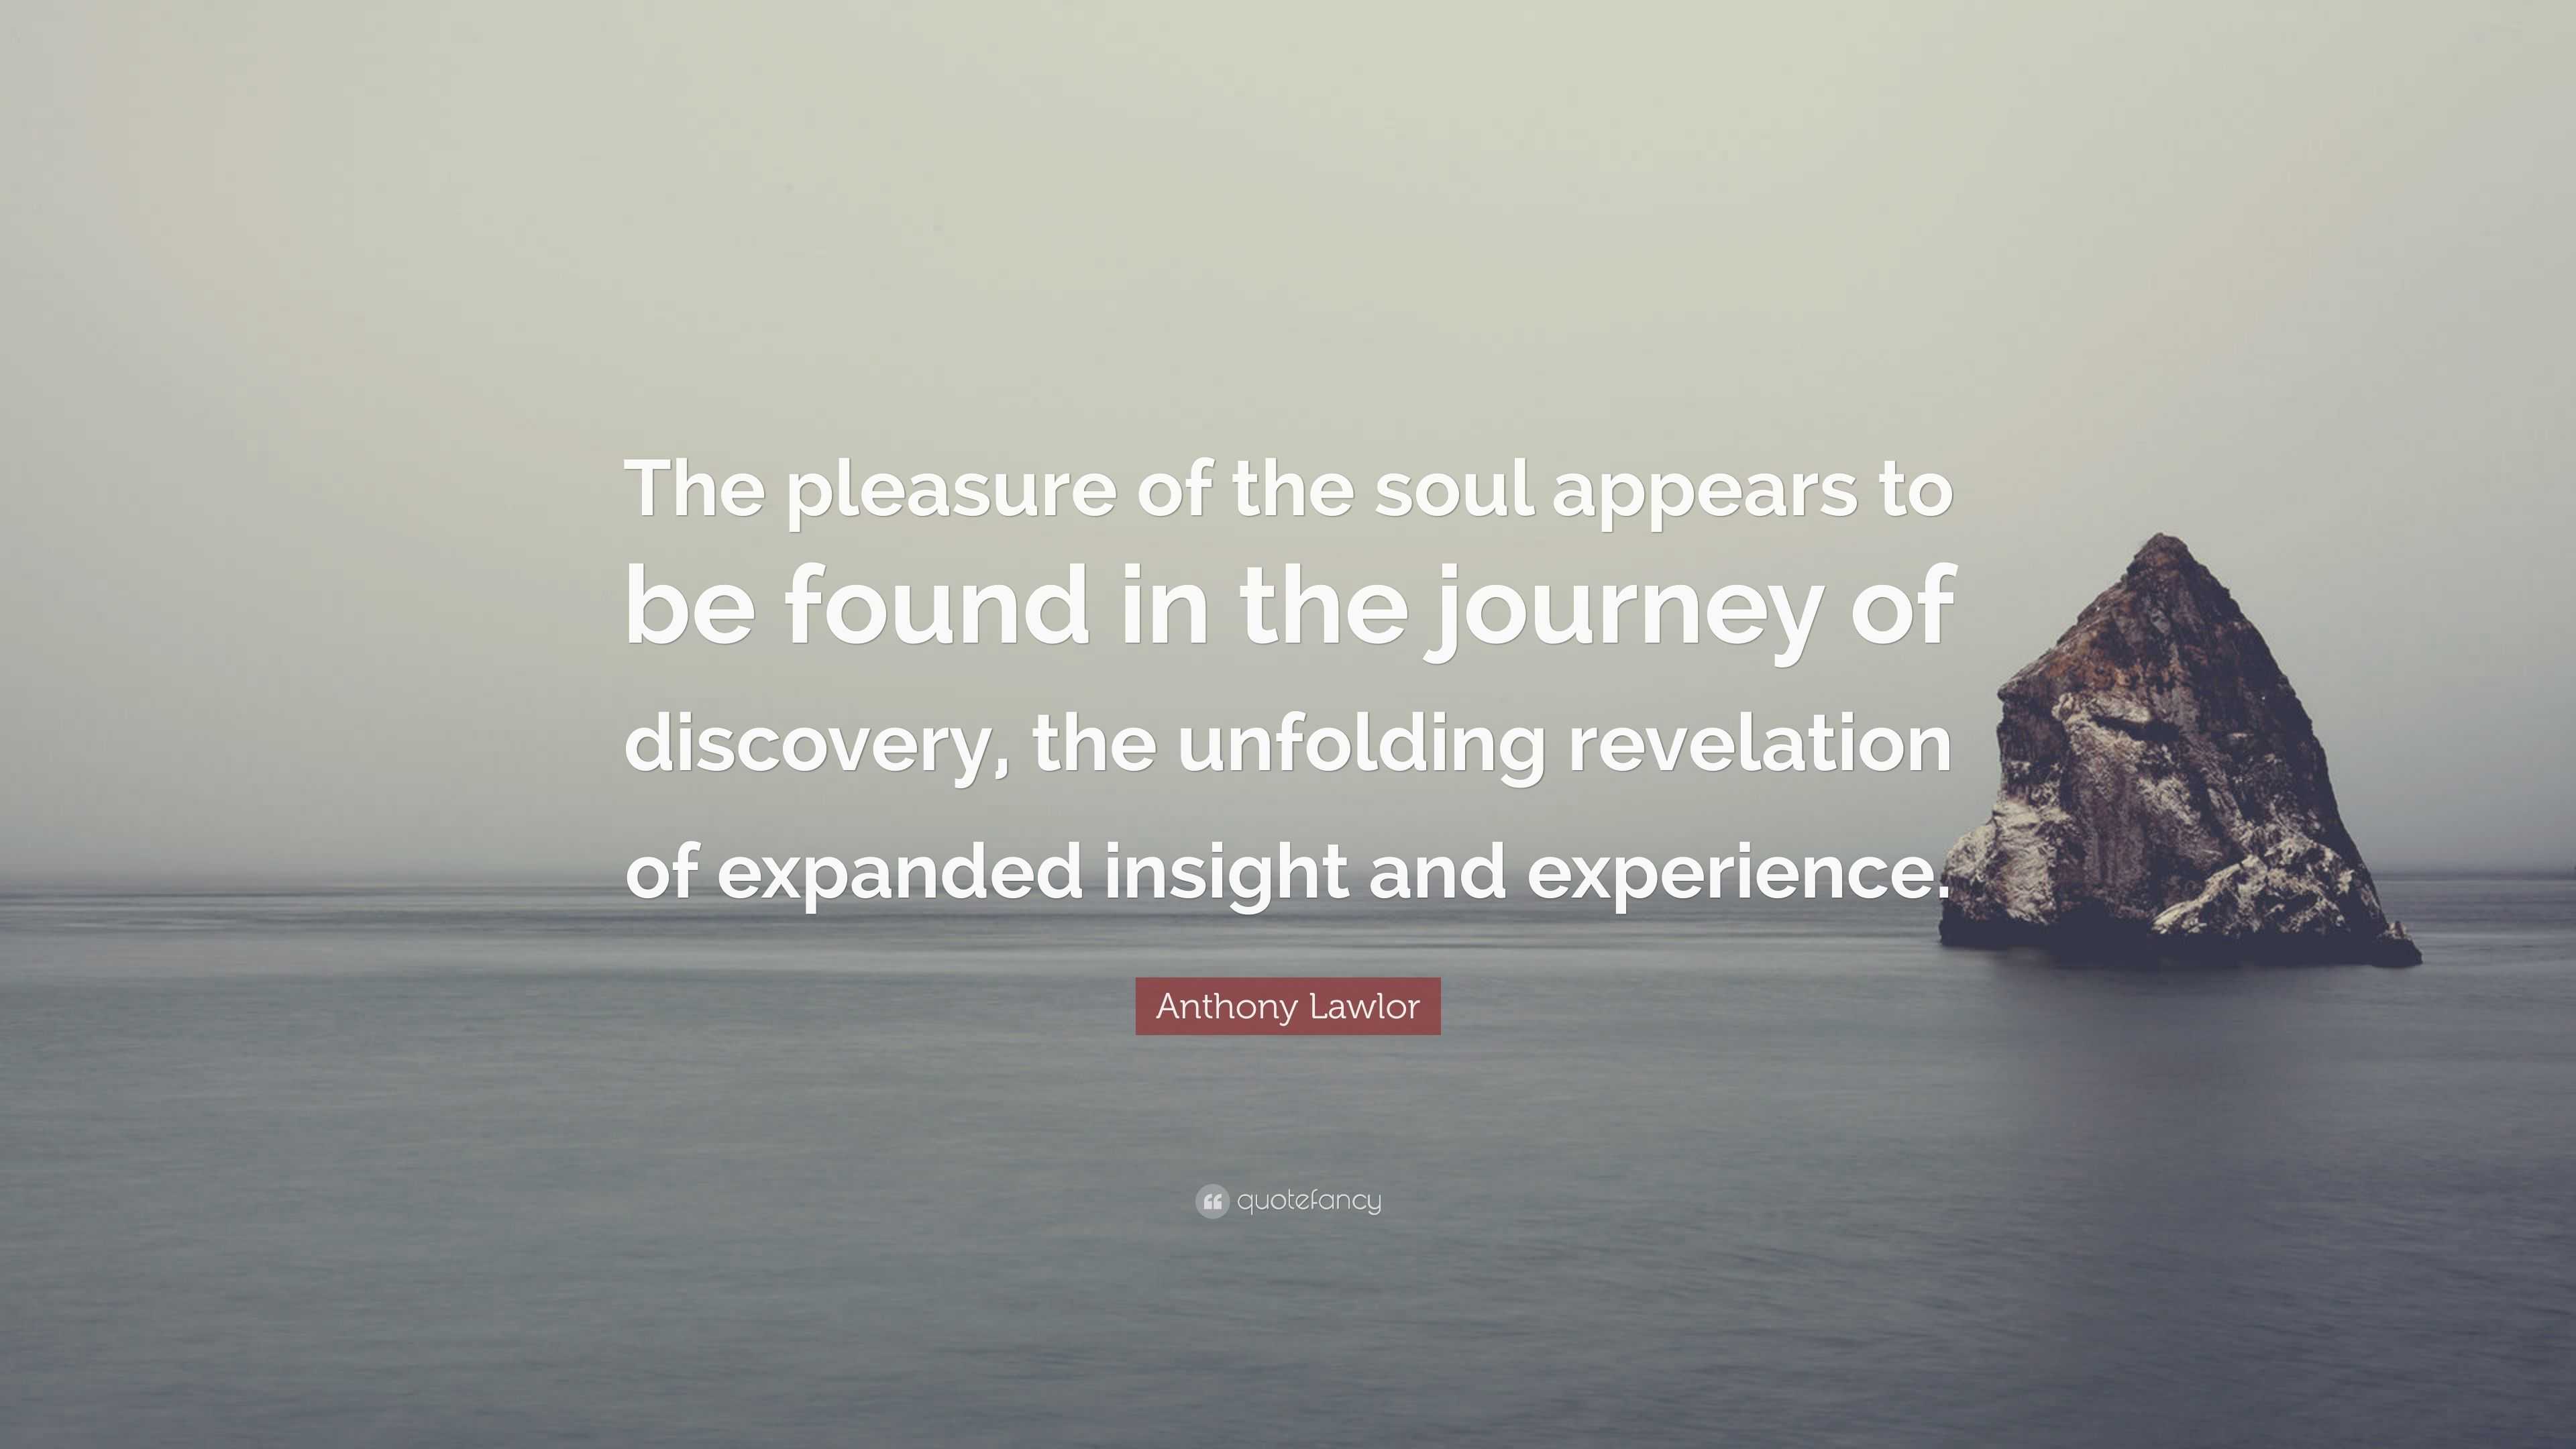 Anthony Lawlor Quote: “The pleasure of the soul appears to be found in ...